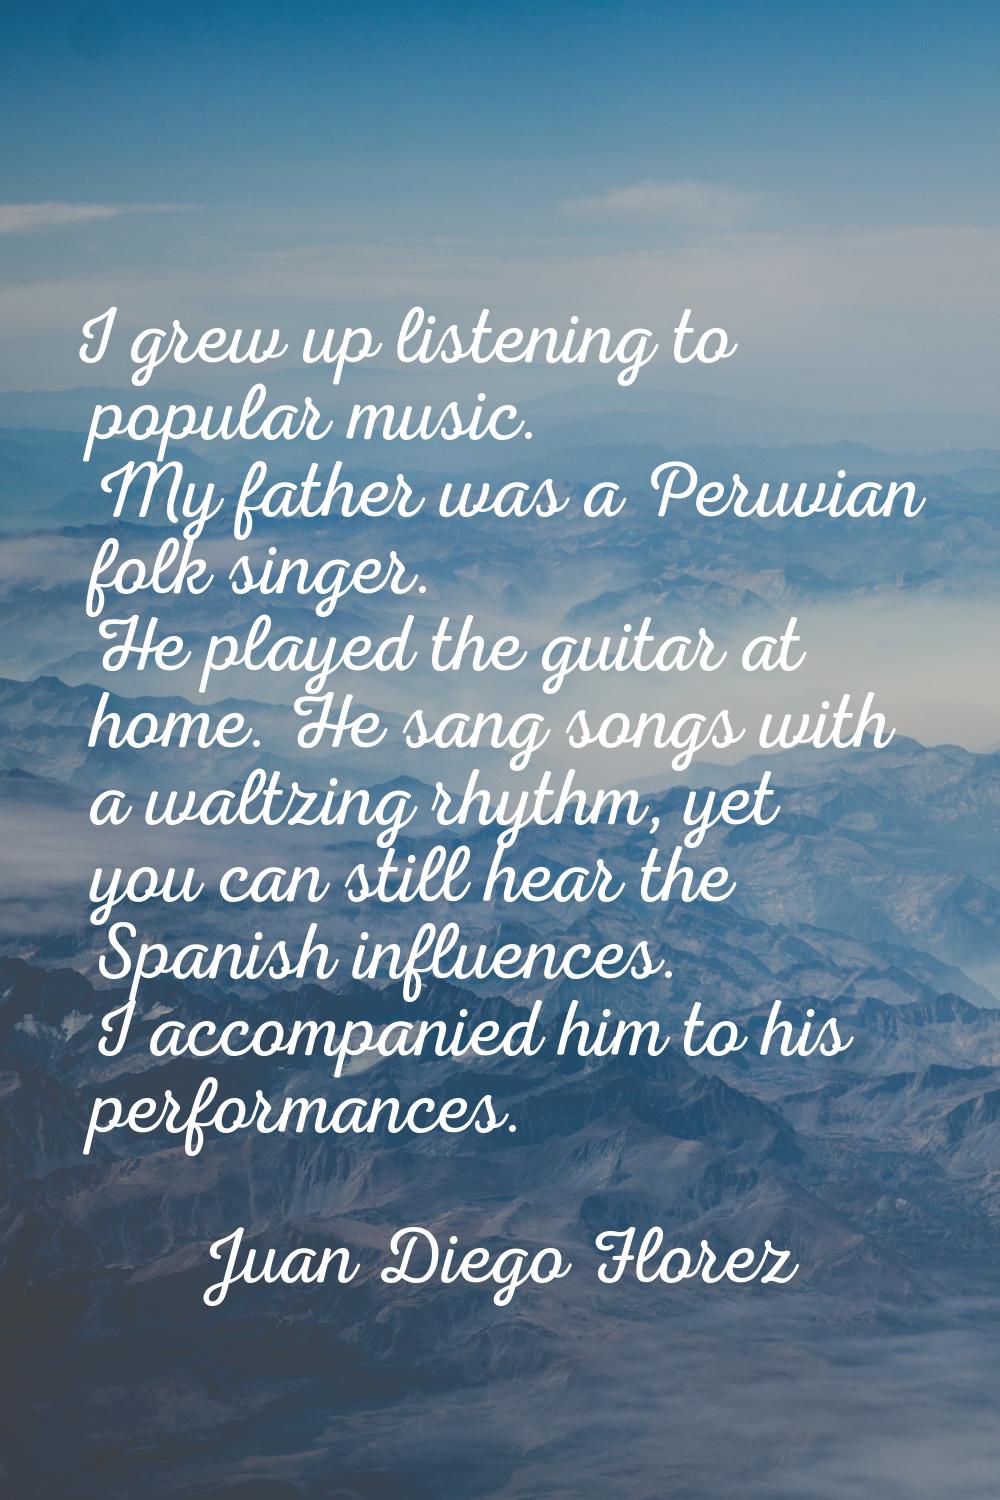 I grew up listening to popular music. My father was a Peruvian folk singer. He played the guitar at